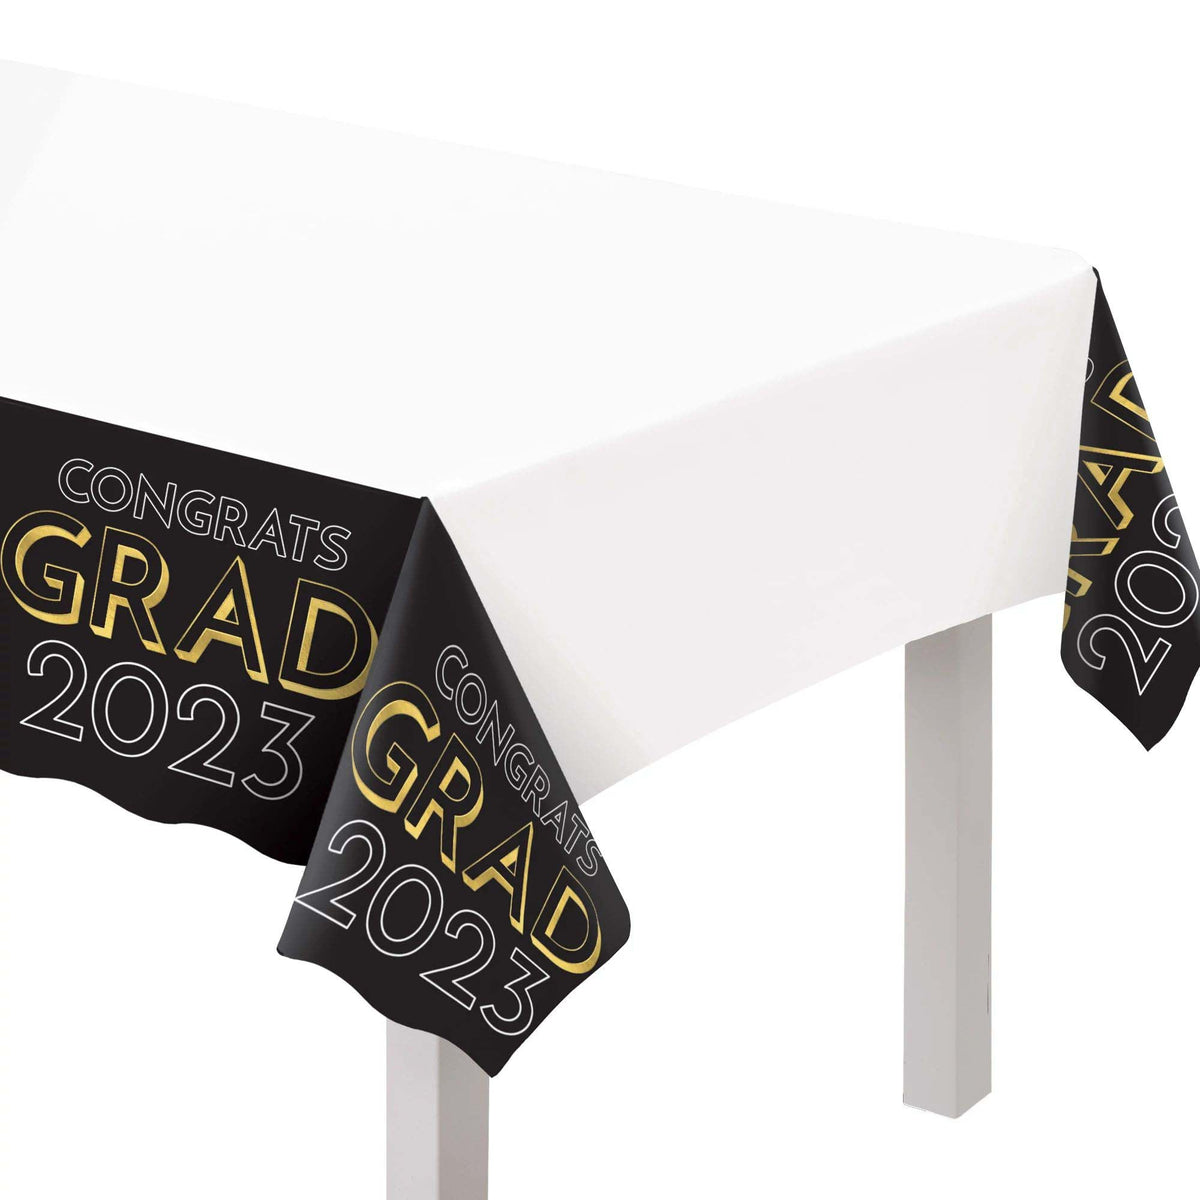 BEISTLE COMPANY Graduation 2023 Congrats Grad Table Cover, 54 x 108 Inches, 1 Count